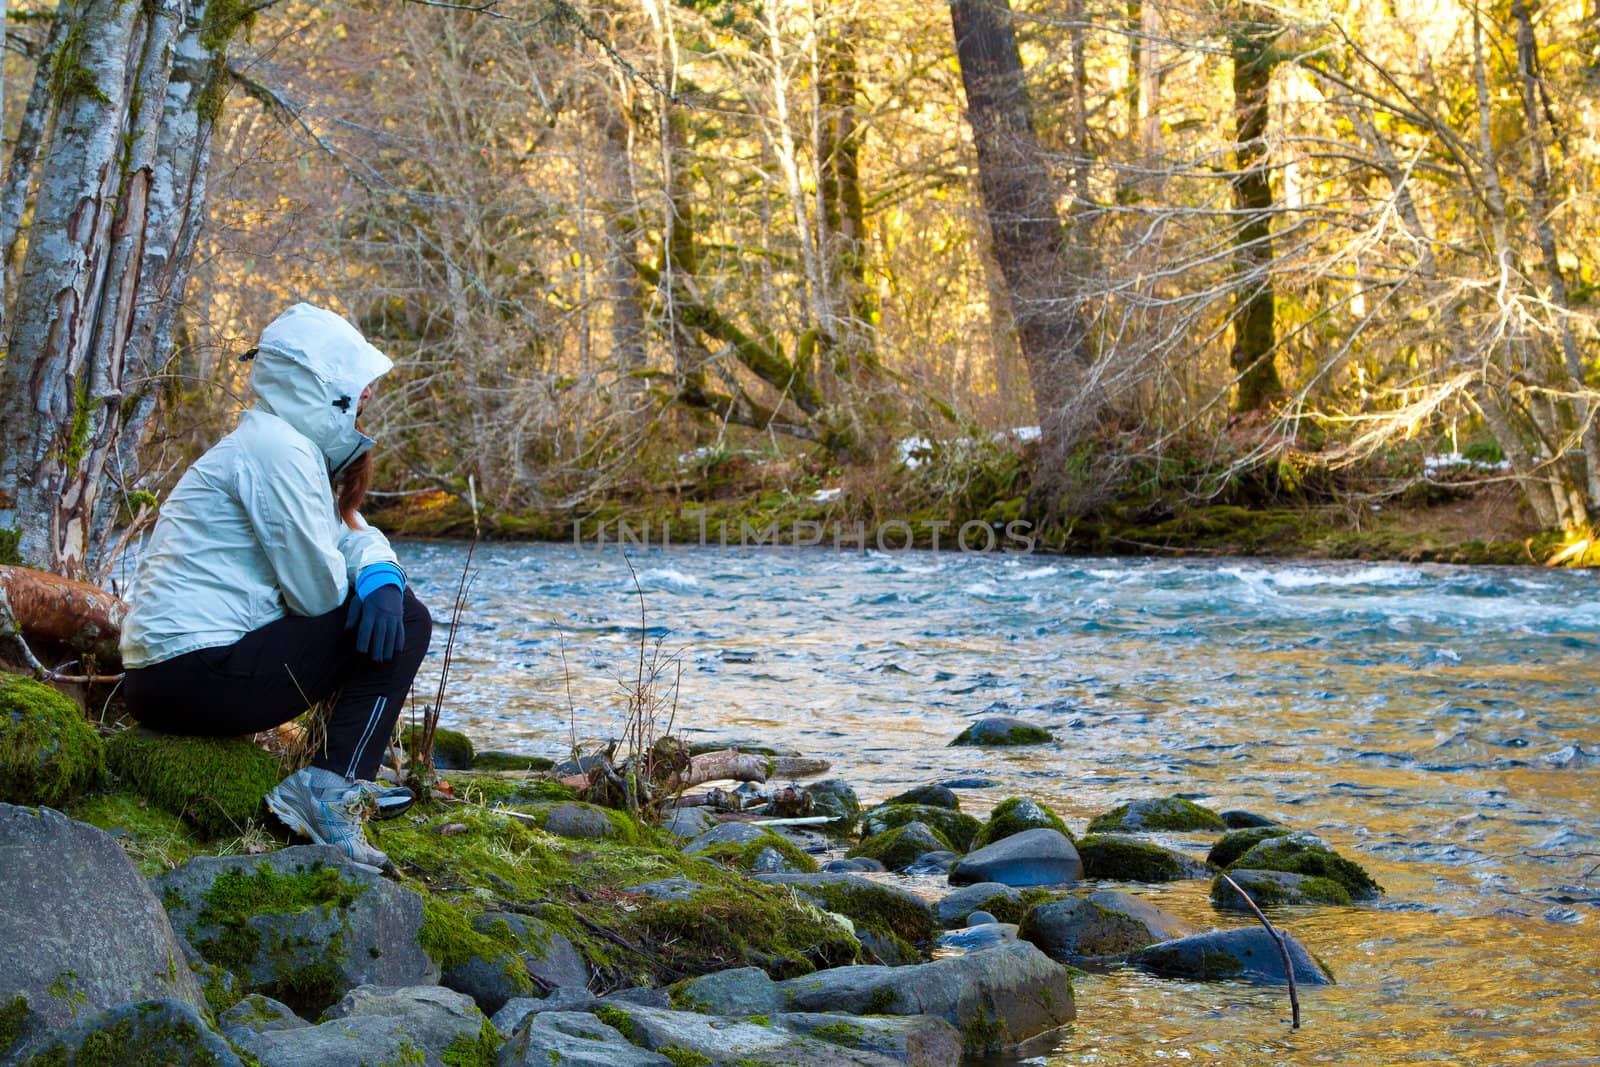 A female hiker takes a rest and looks out over the water of the McKenzie River in Oregon.